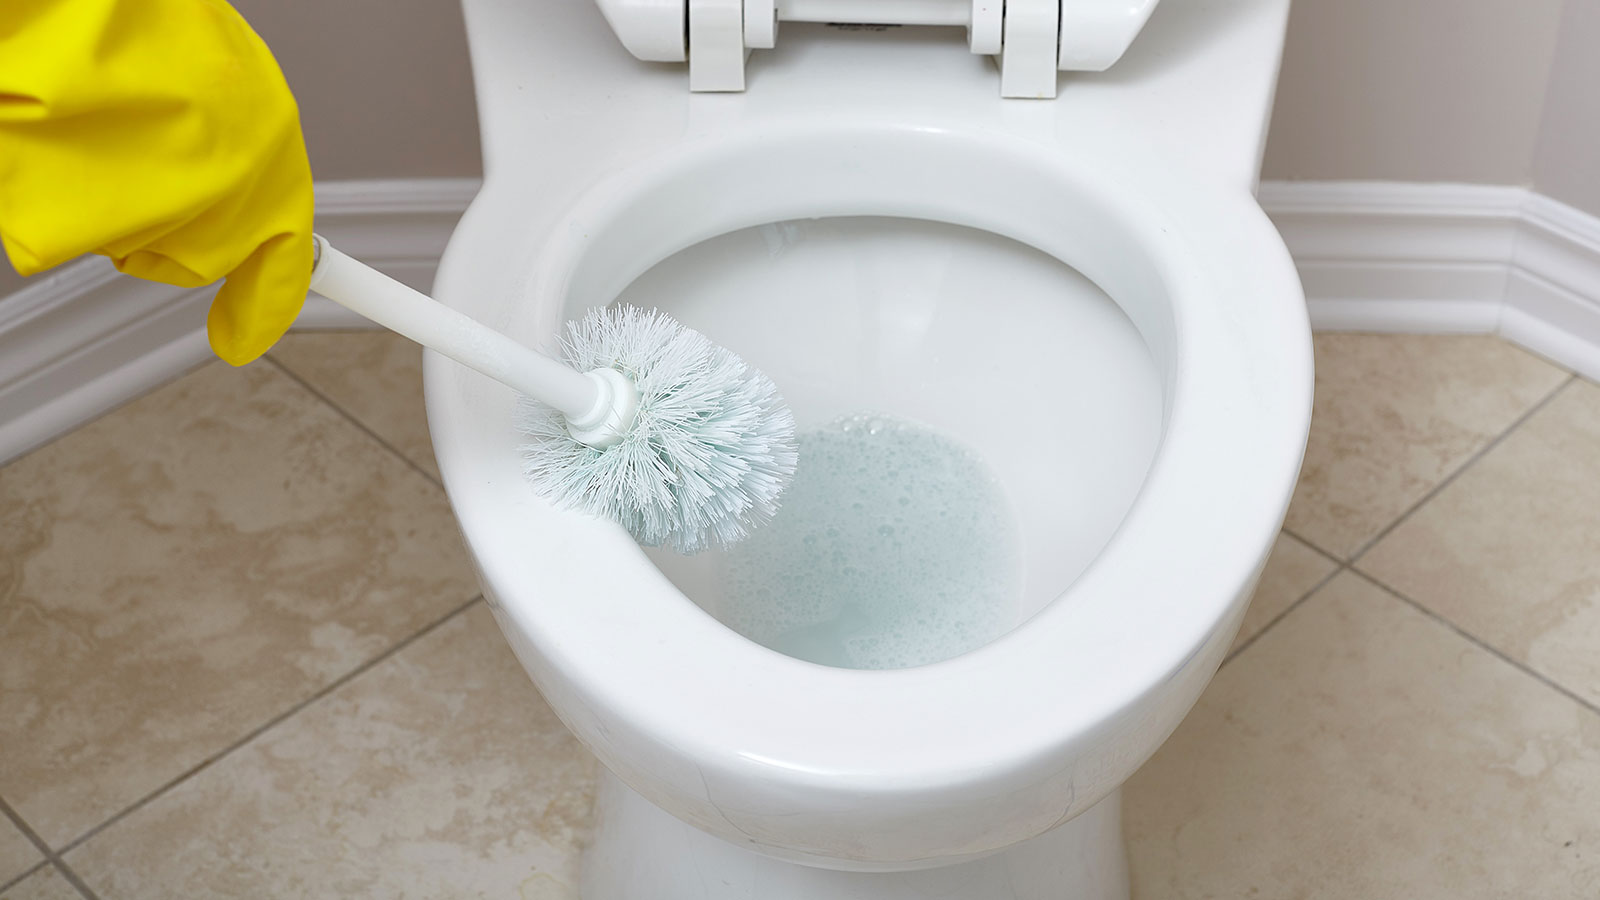 How To Get Rid Of Poop Stain In Toilet Bowl